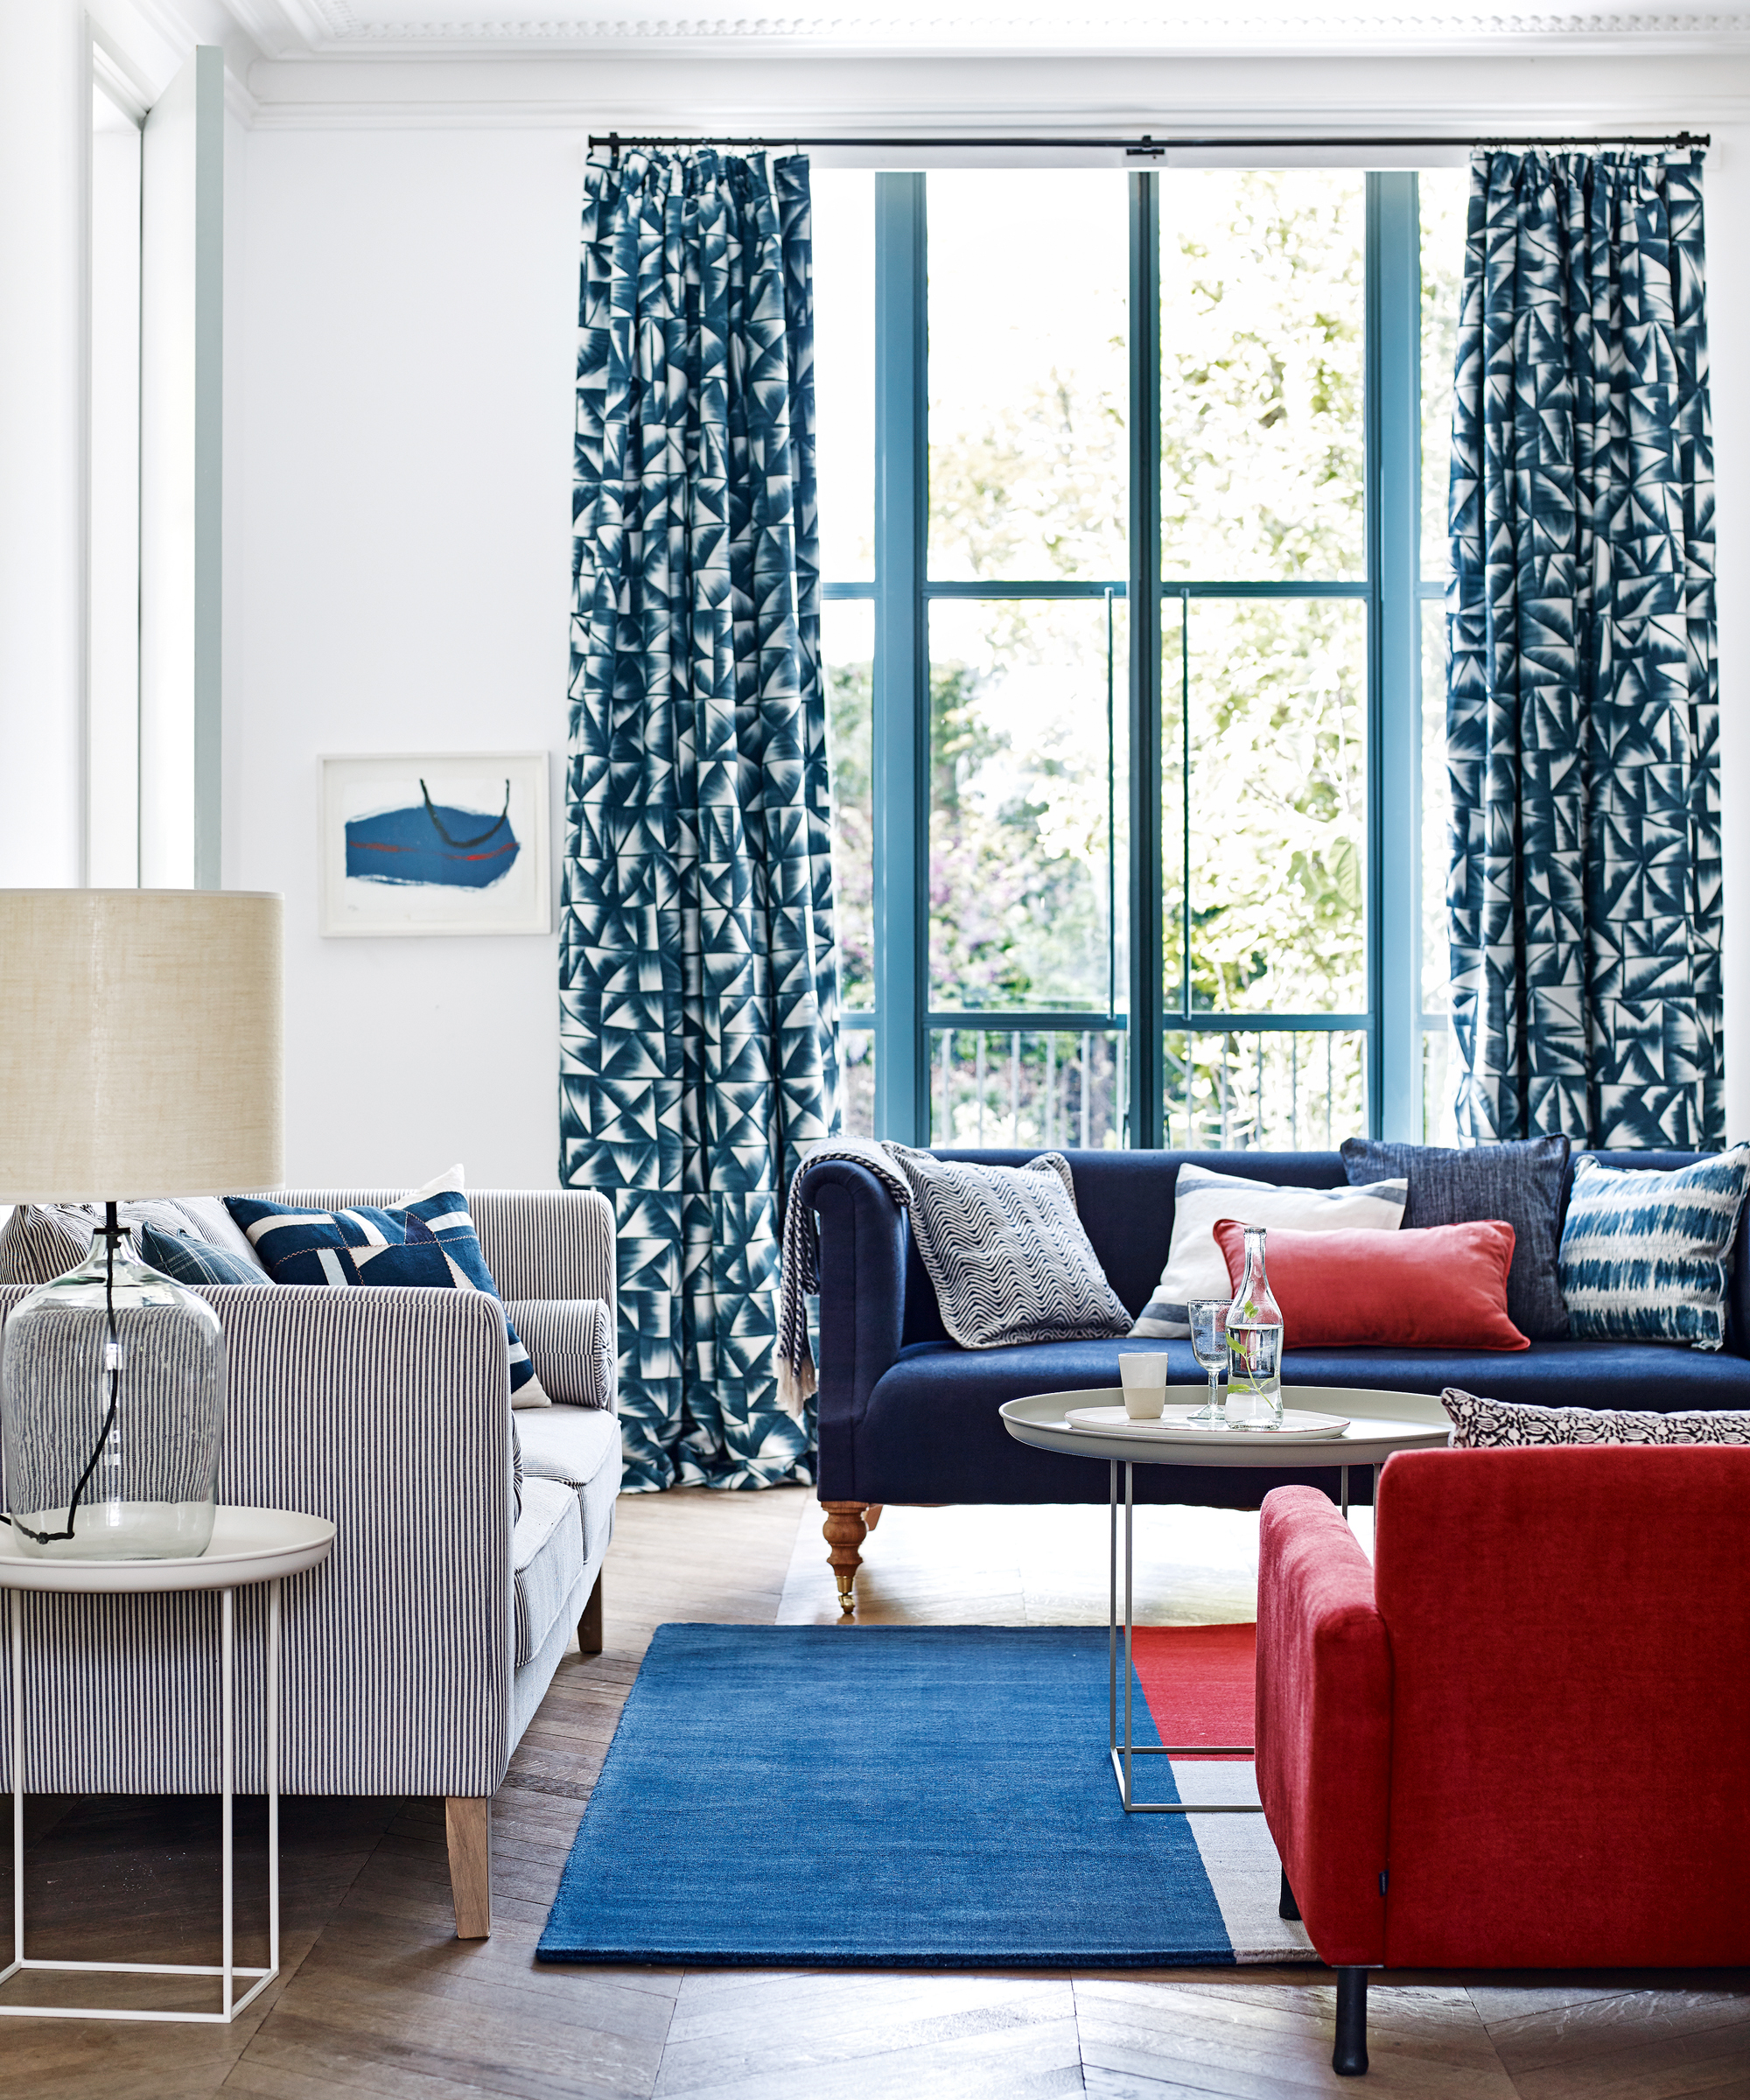 living roomwith white walls, dark blue patterned curtains and blue and red furniture